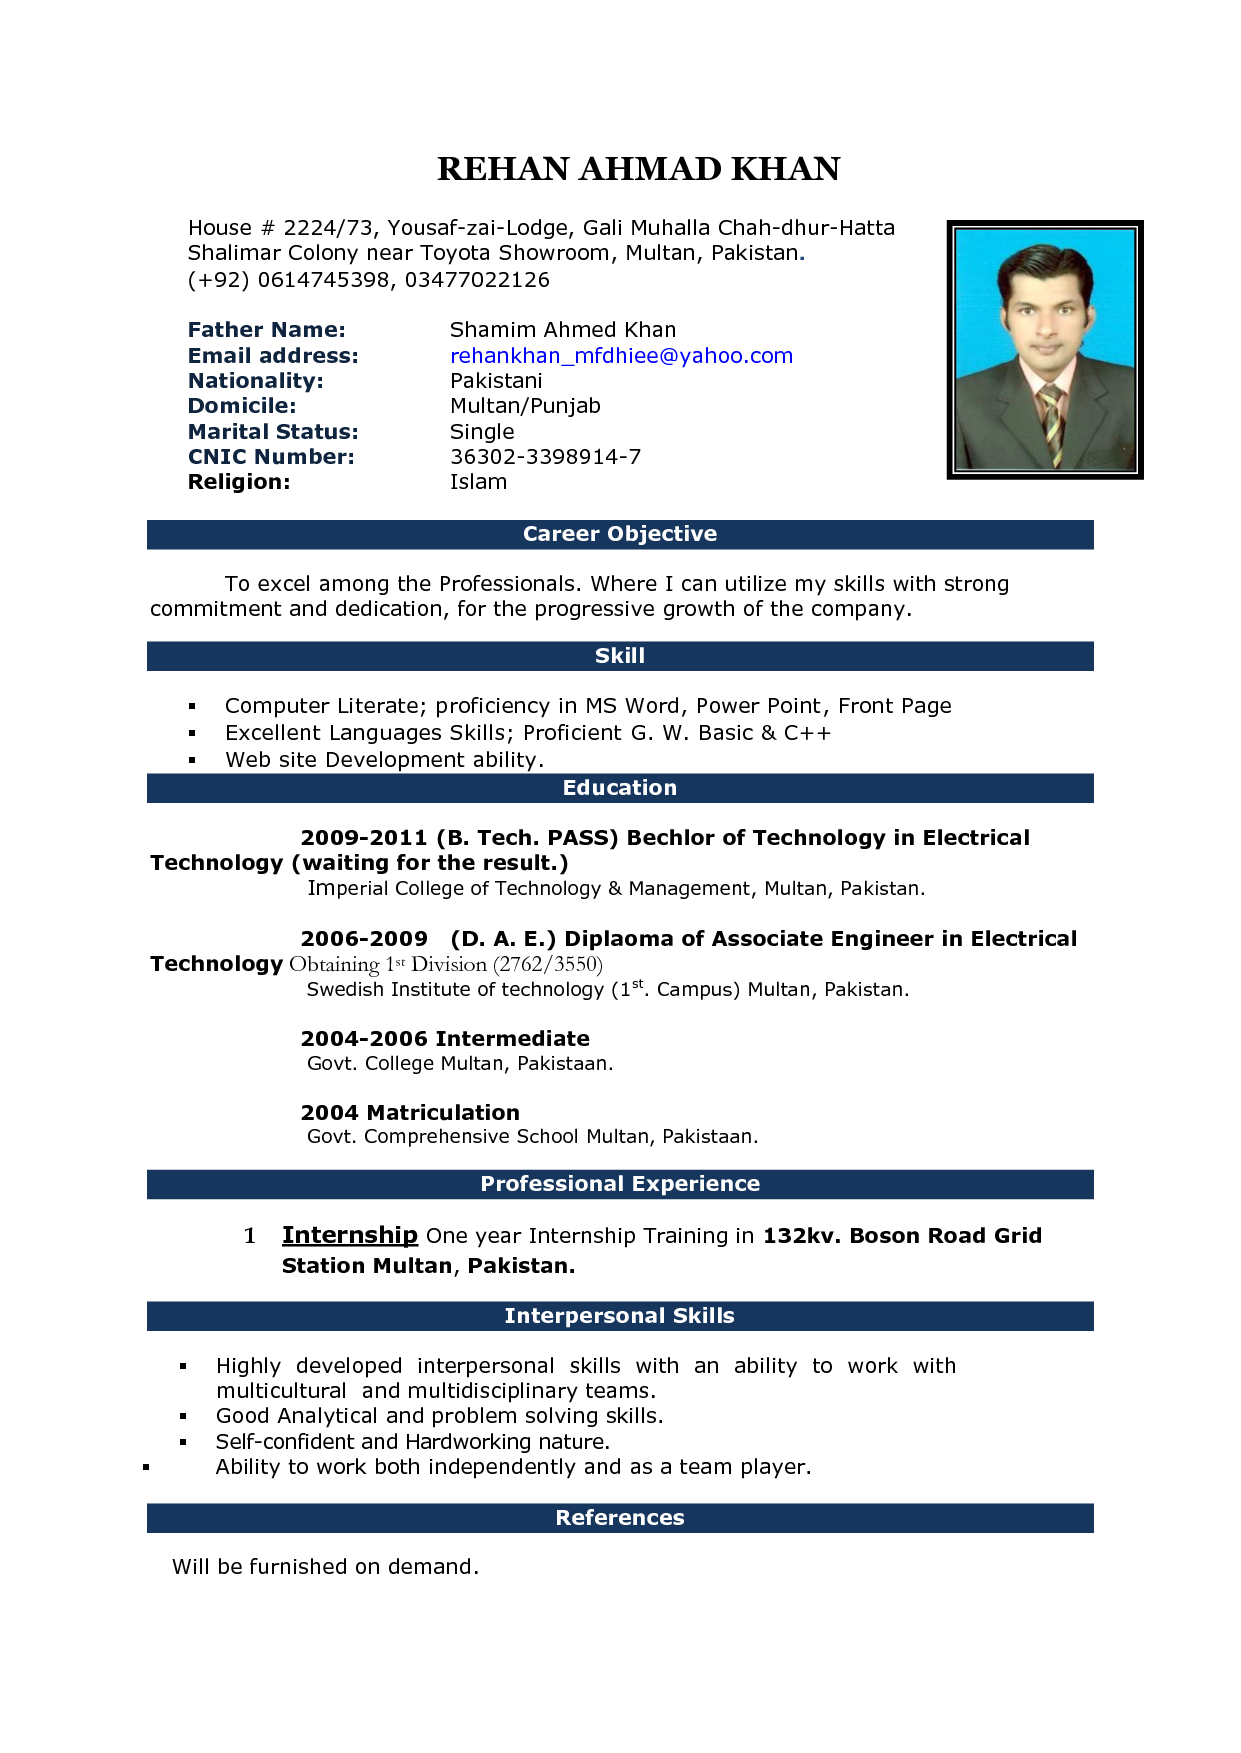 Cv Templates In Word 2007 Enom with regard to dimensions 1241 X 1753